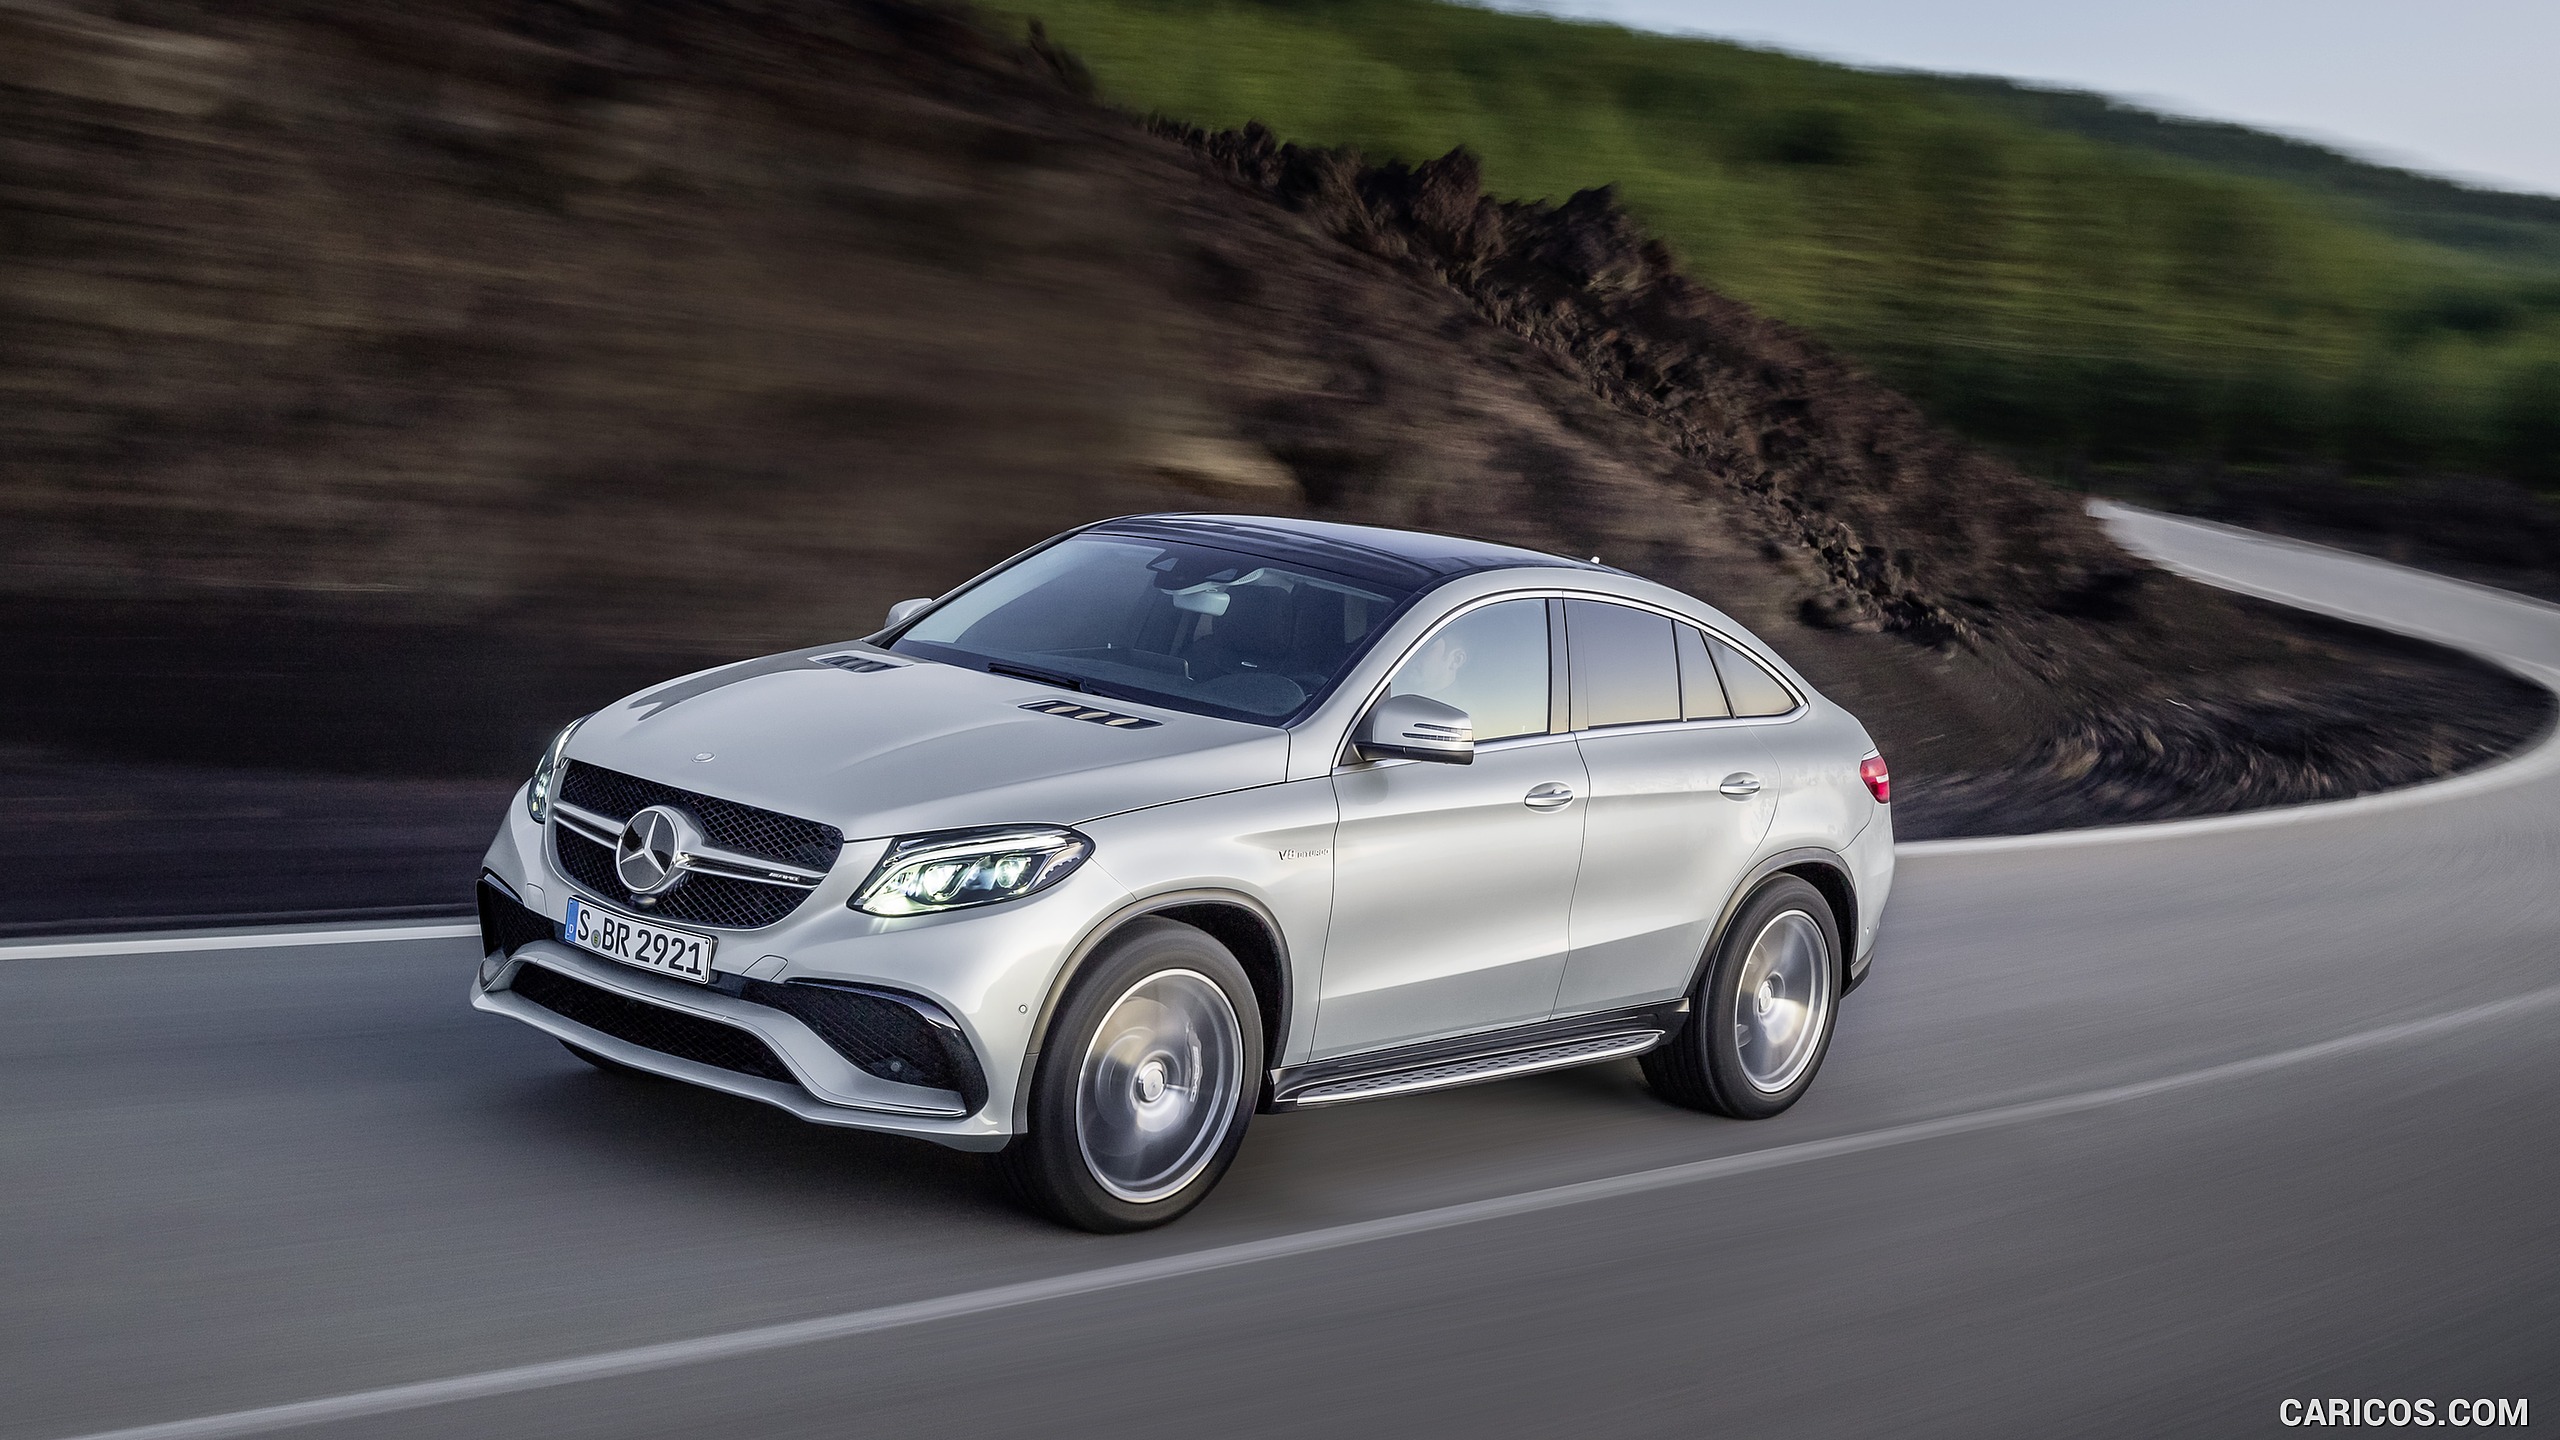 2016 Mercedes-AMG GLE 63 Coupe 4MATIC - Front | Caricos